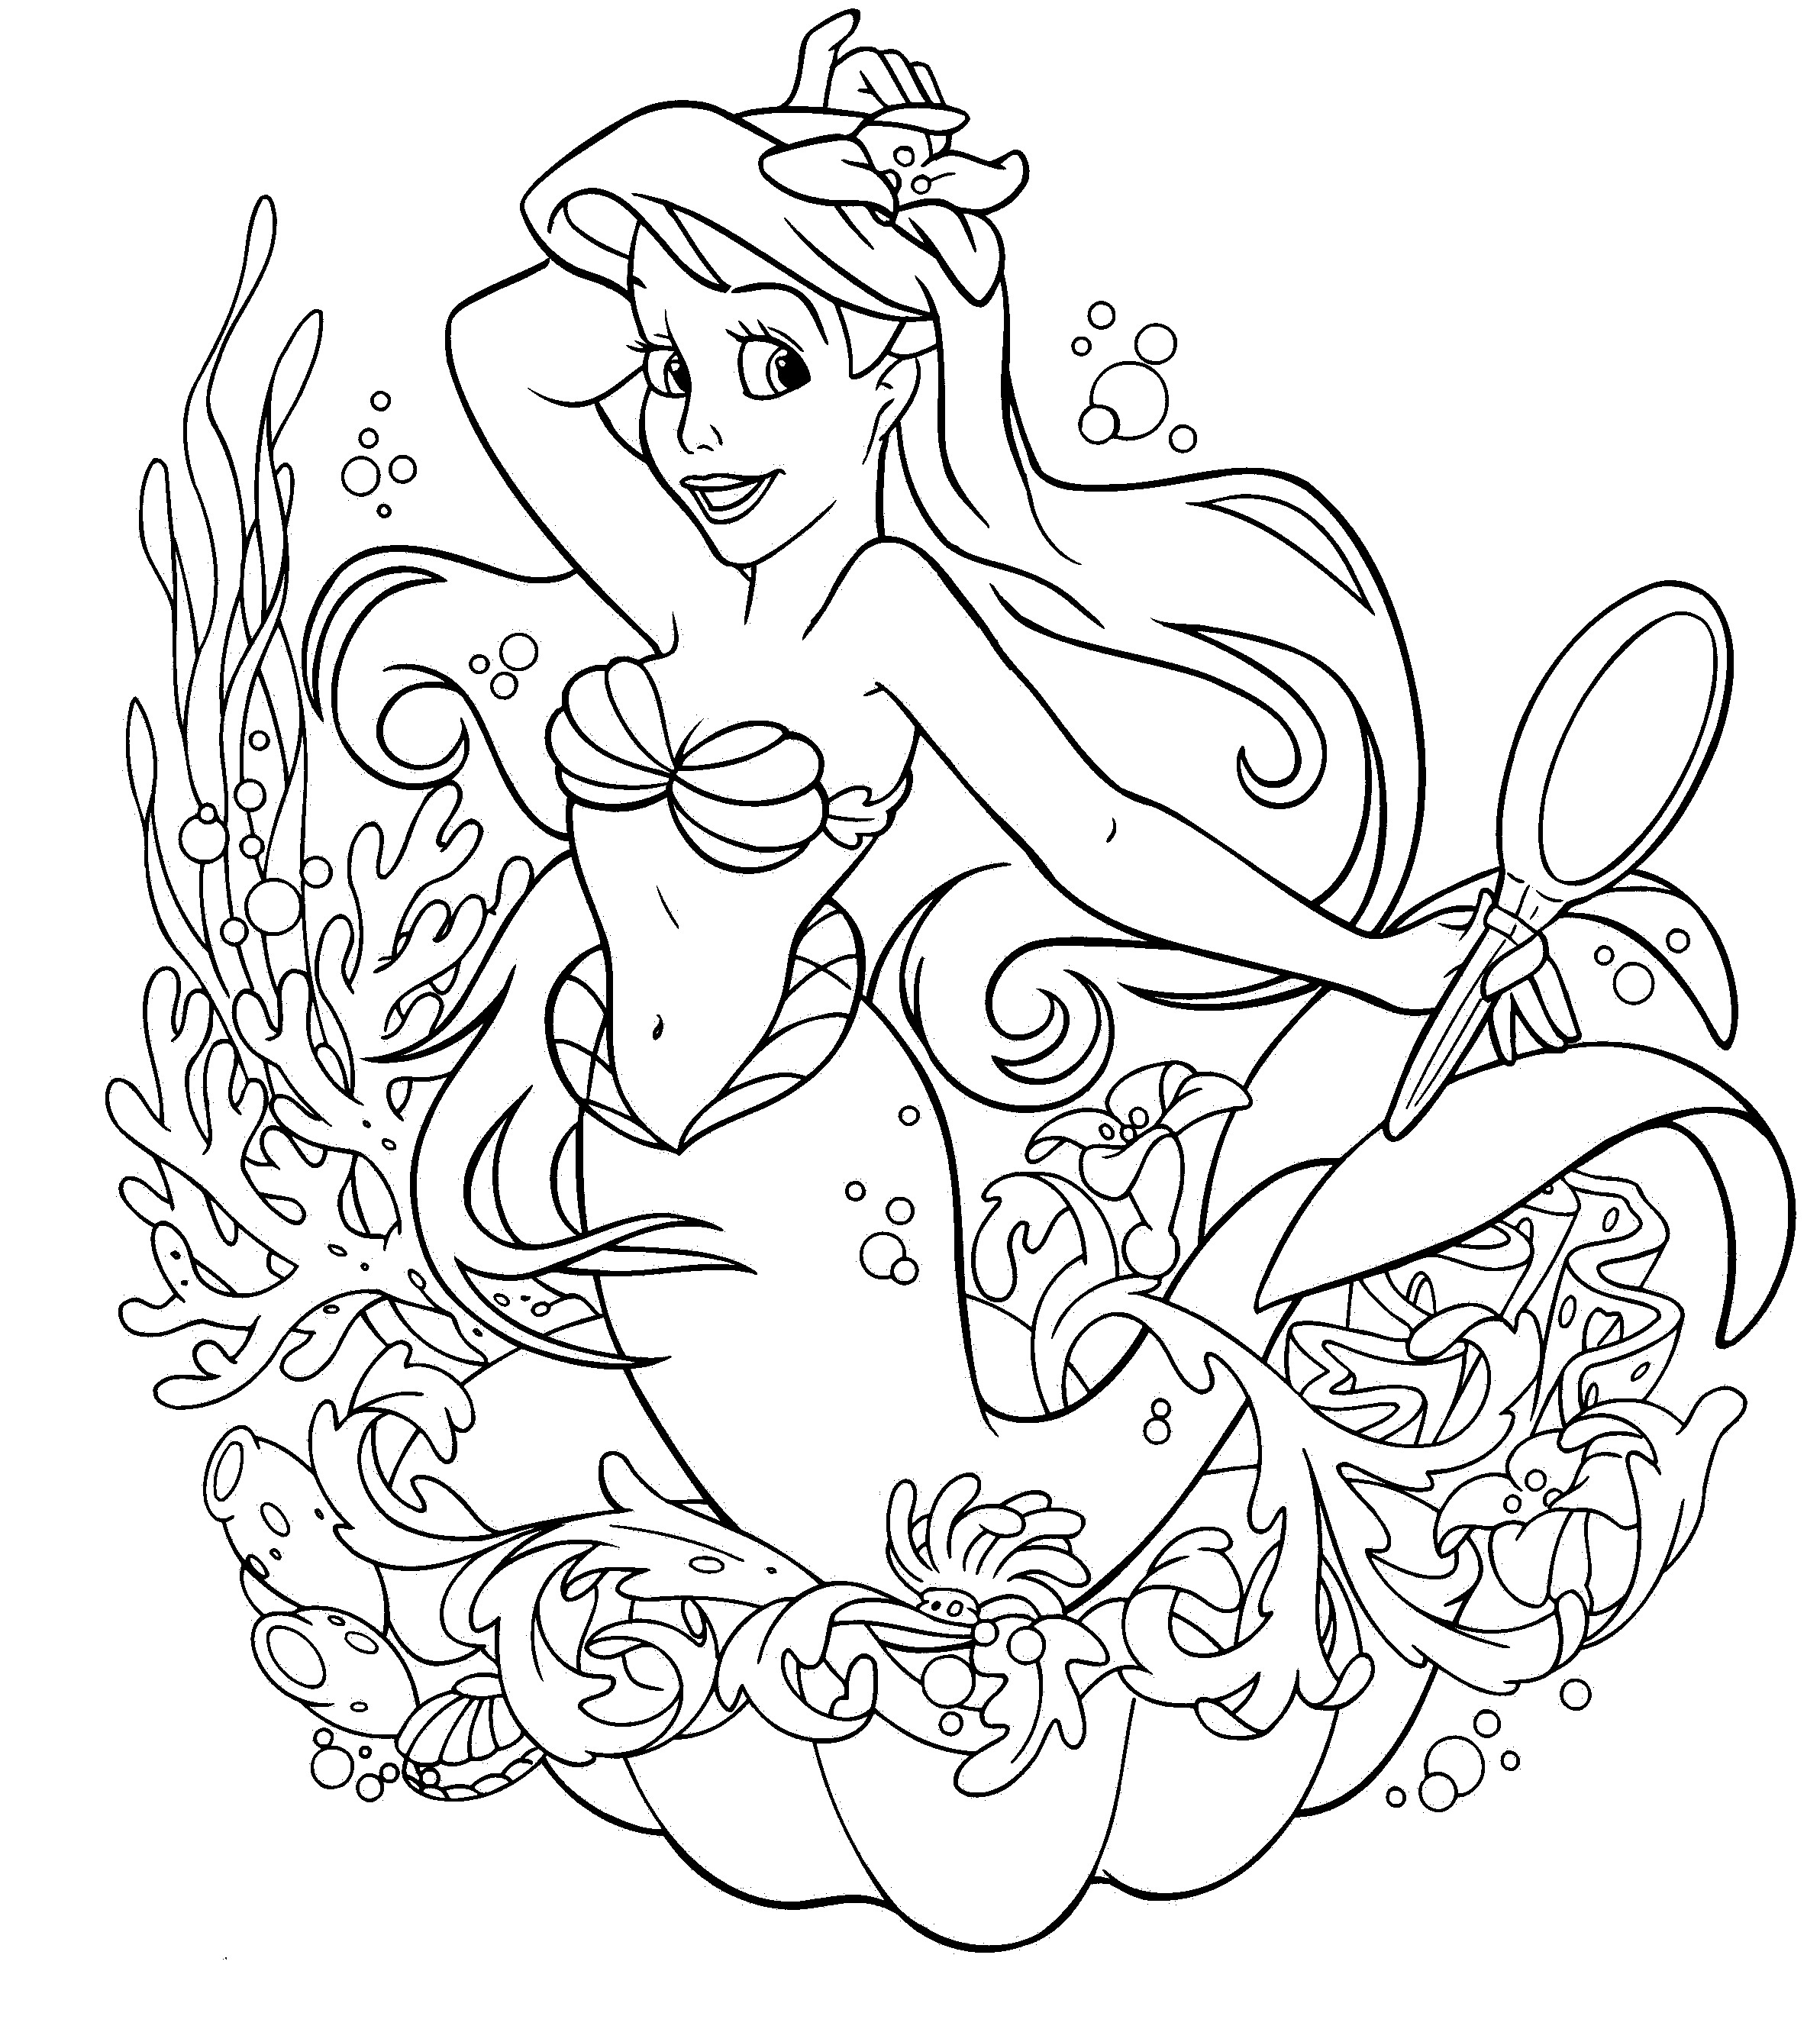 Free Coloring Pages For Girls Disney
 1000 images about Colouring on Pinterest